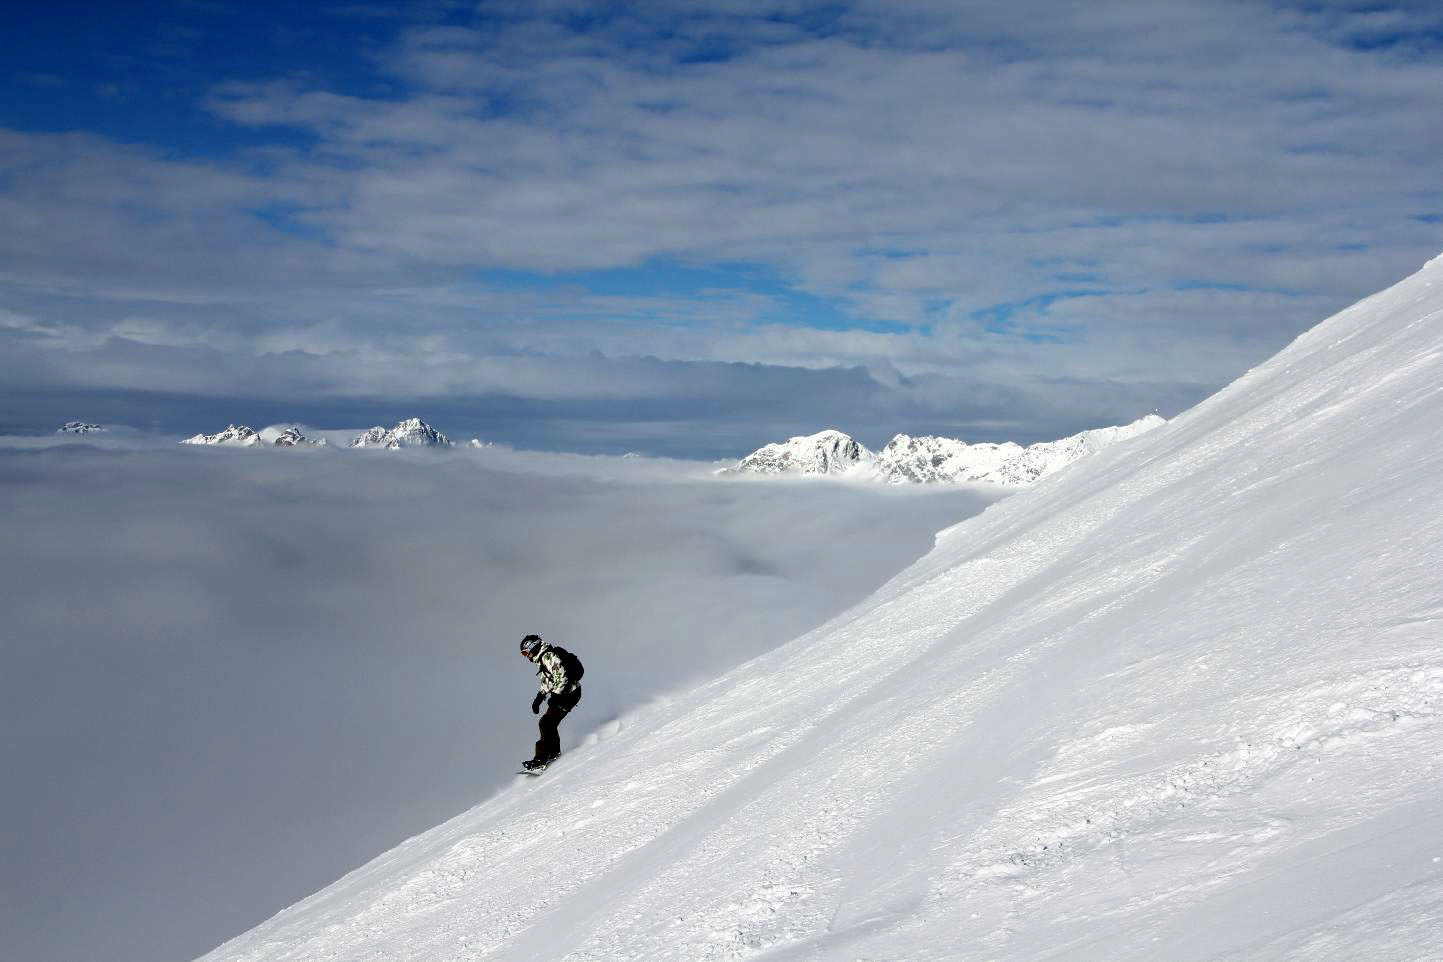 Snowboarding above the clouds © JonoVernon-Powell